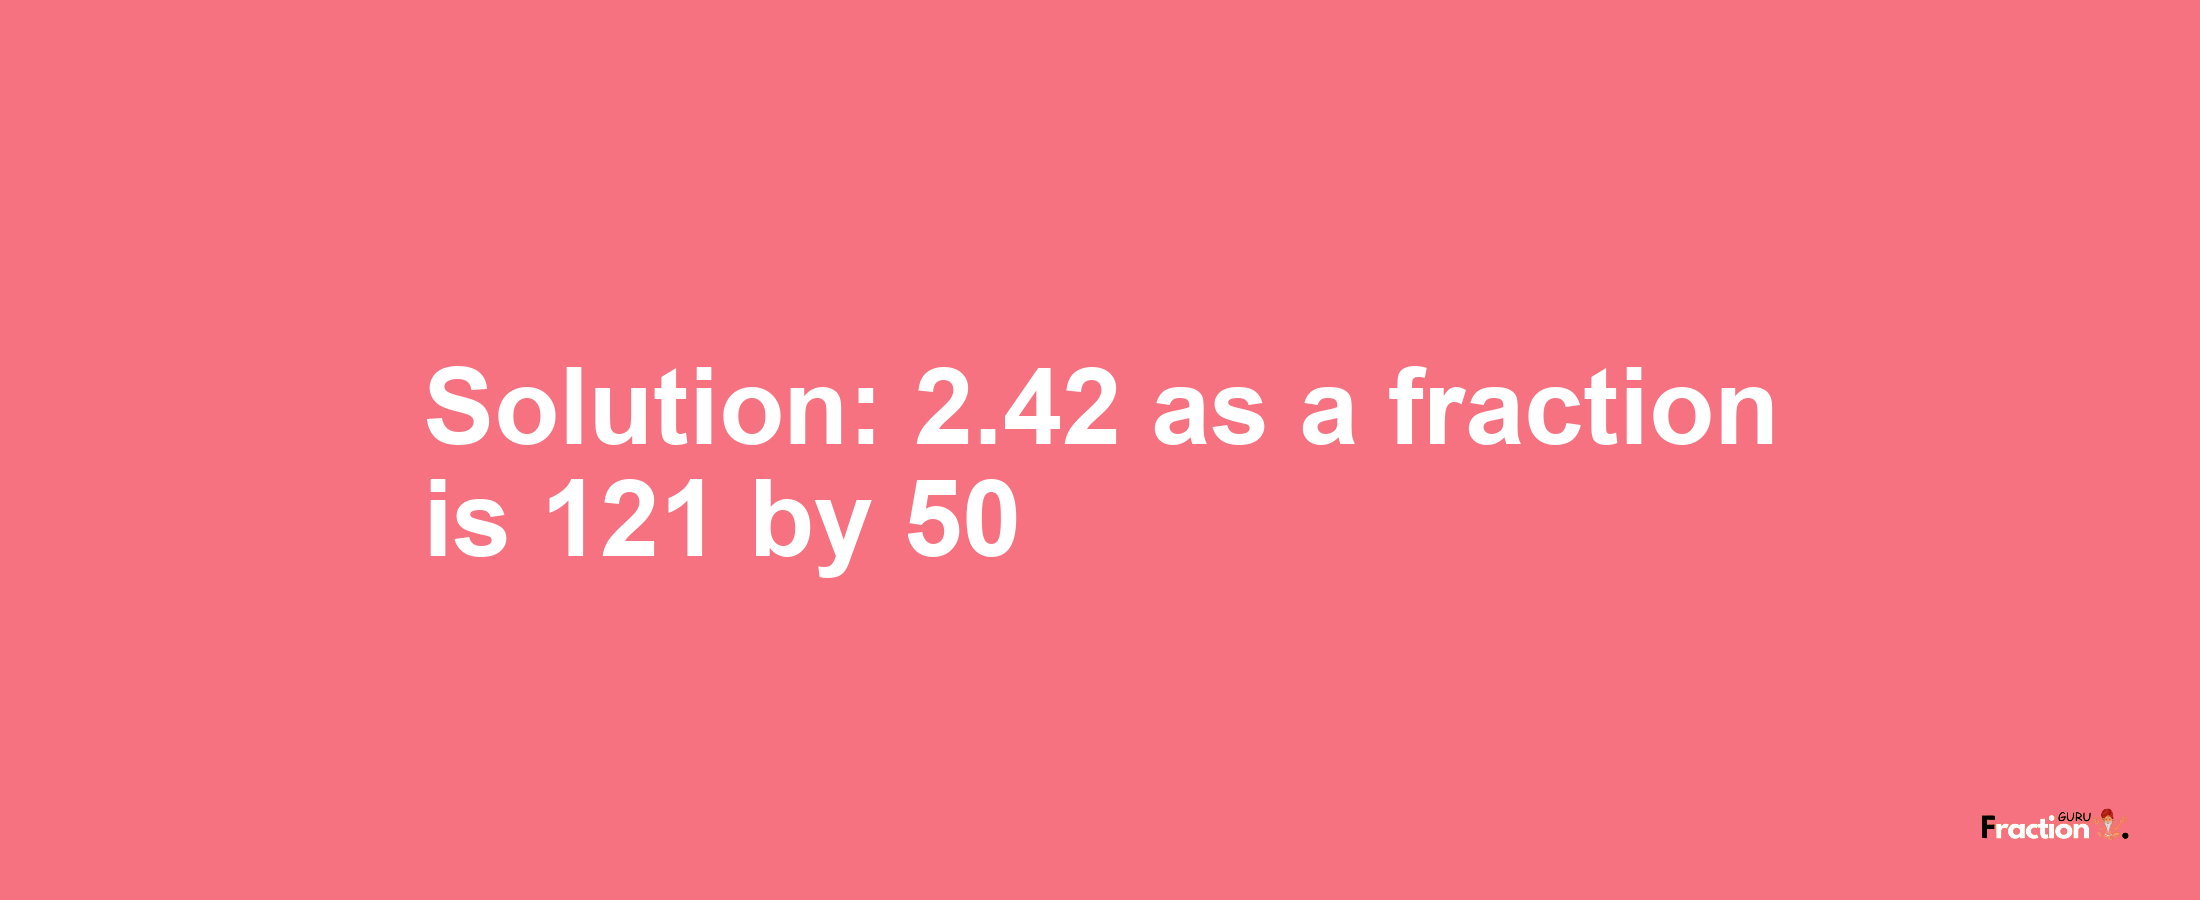 Solution:2.42 as a fraction is 121/50